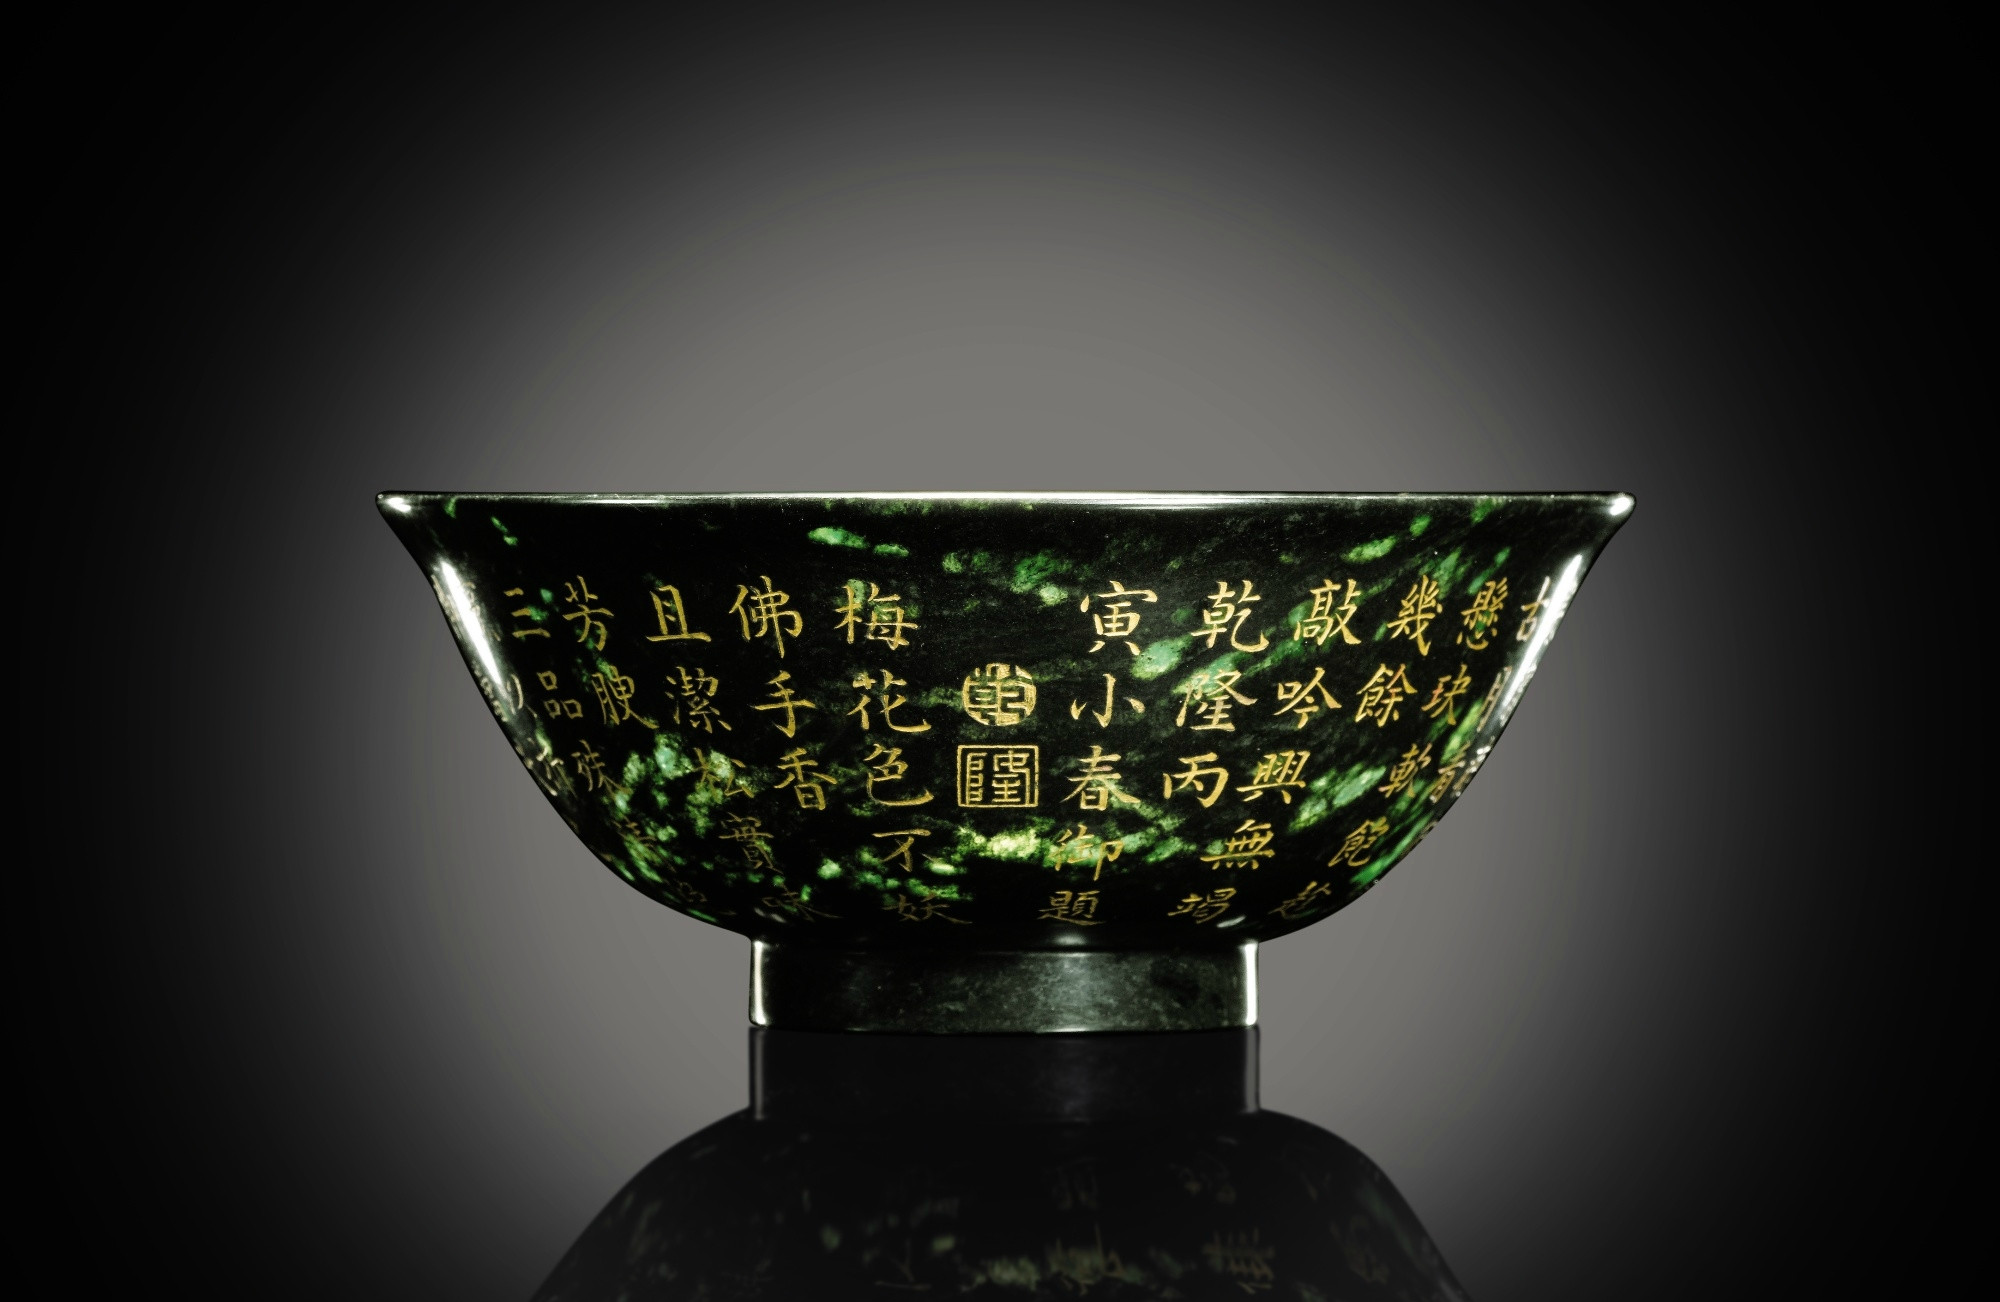 13 Cute Qianlong Emperor Vase 2024 free download qianlong emperor vase of a fine and rare spinach jade bowl with an imperial poem carved seal inside a fine and rare spinach jade bowl with an imperial poem carved seal mark and period of qia